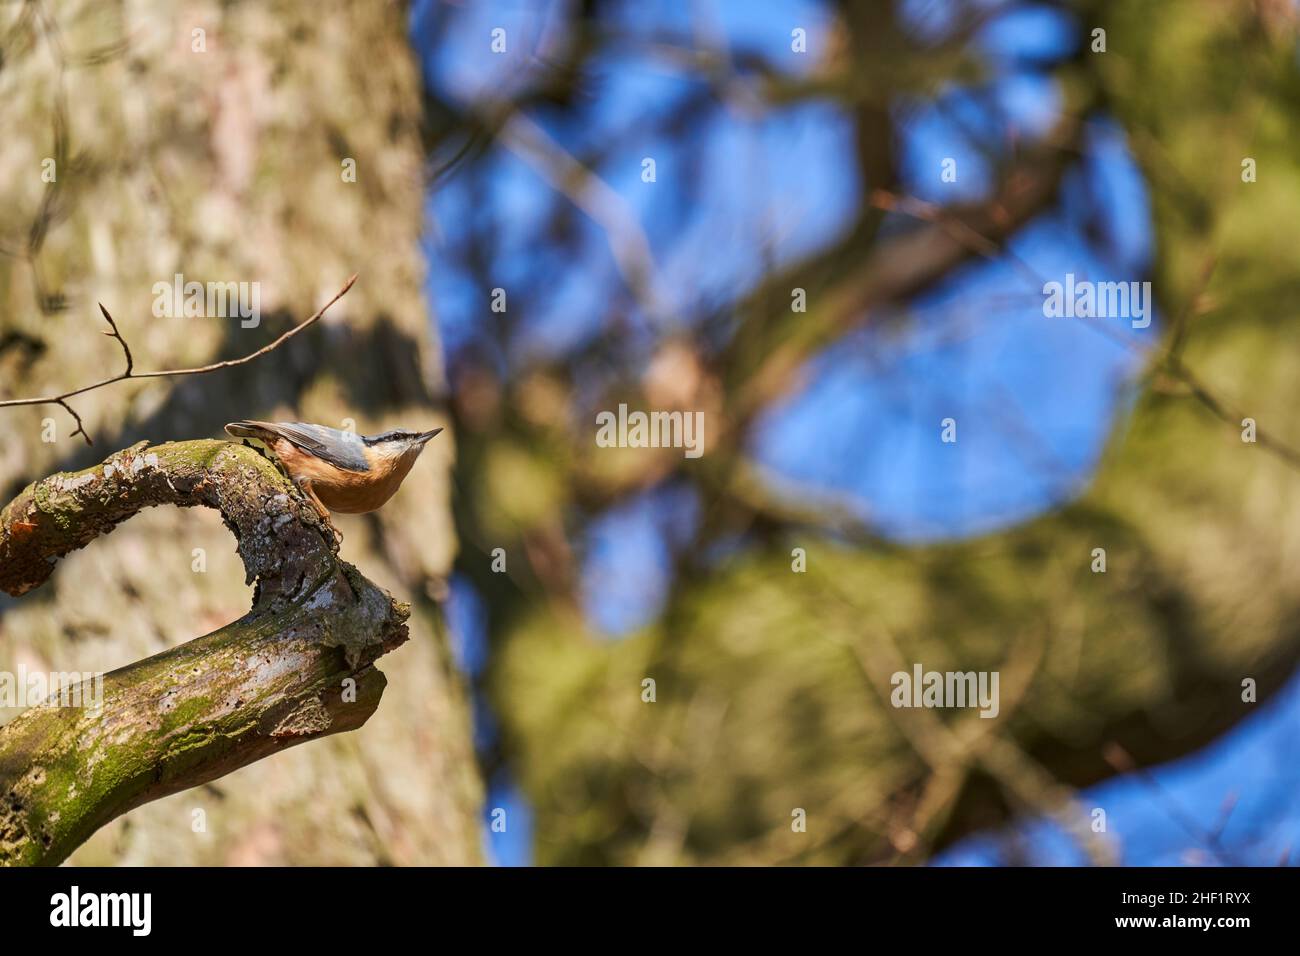 The Eurasian nuthatch or wood nuthatch, Sitta europae, is a small passerine bird short tailed bird with a long bill, blue grey upperparts and a black Stock Photo